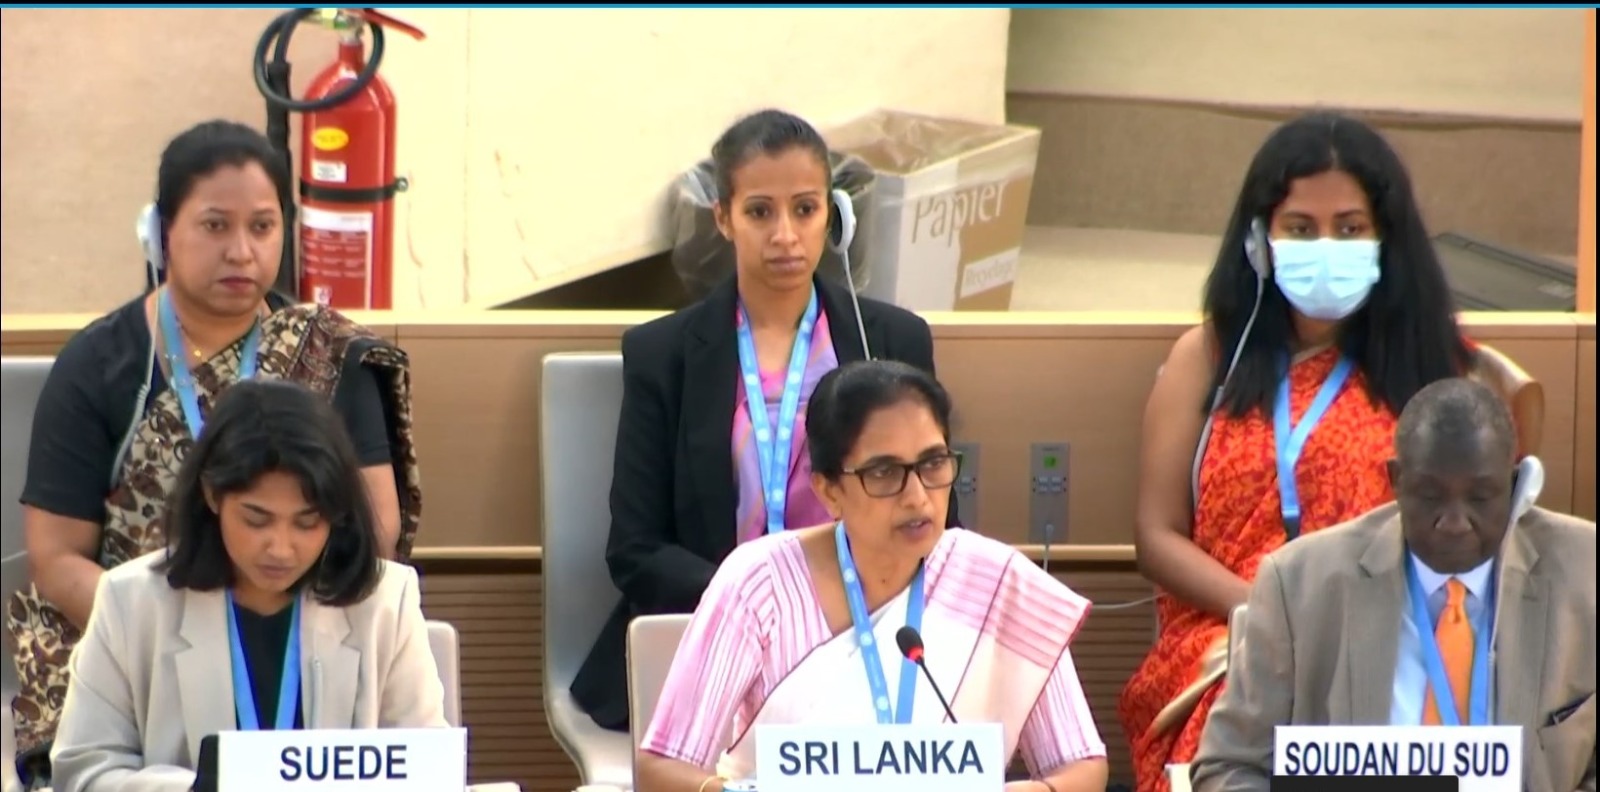 Sri Lanka rejects High Commissioner’s Written Update and reaffirms commitment to pursuing human rights through domestic institutions